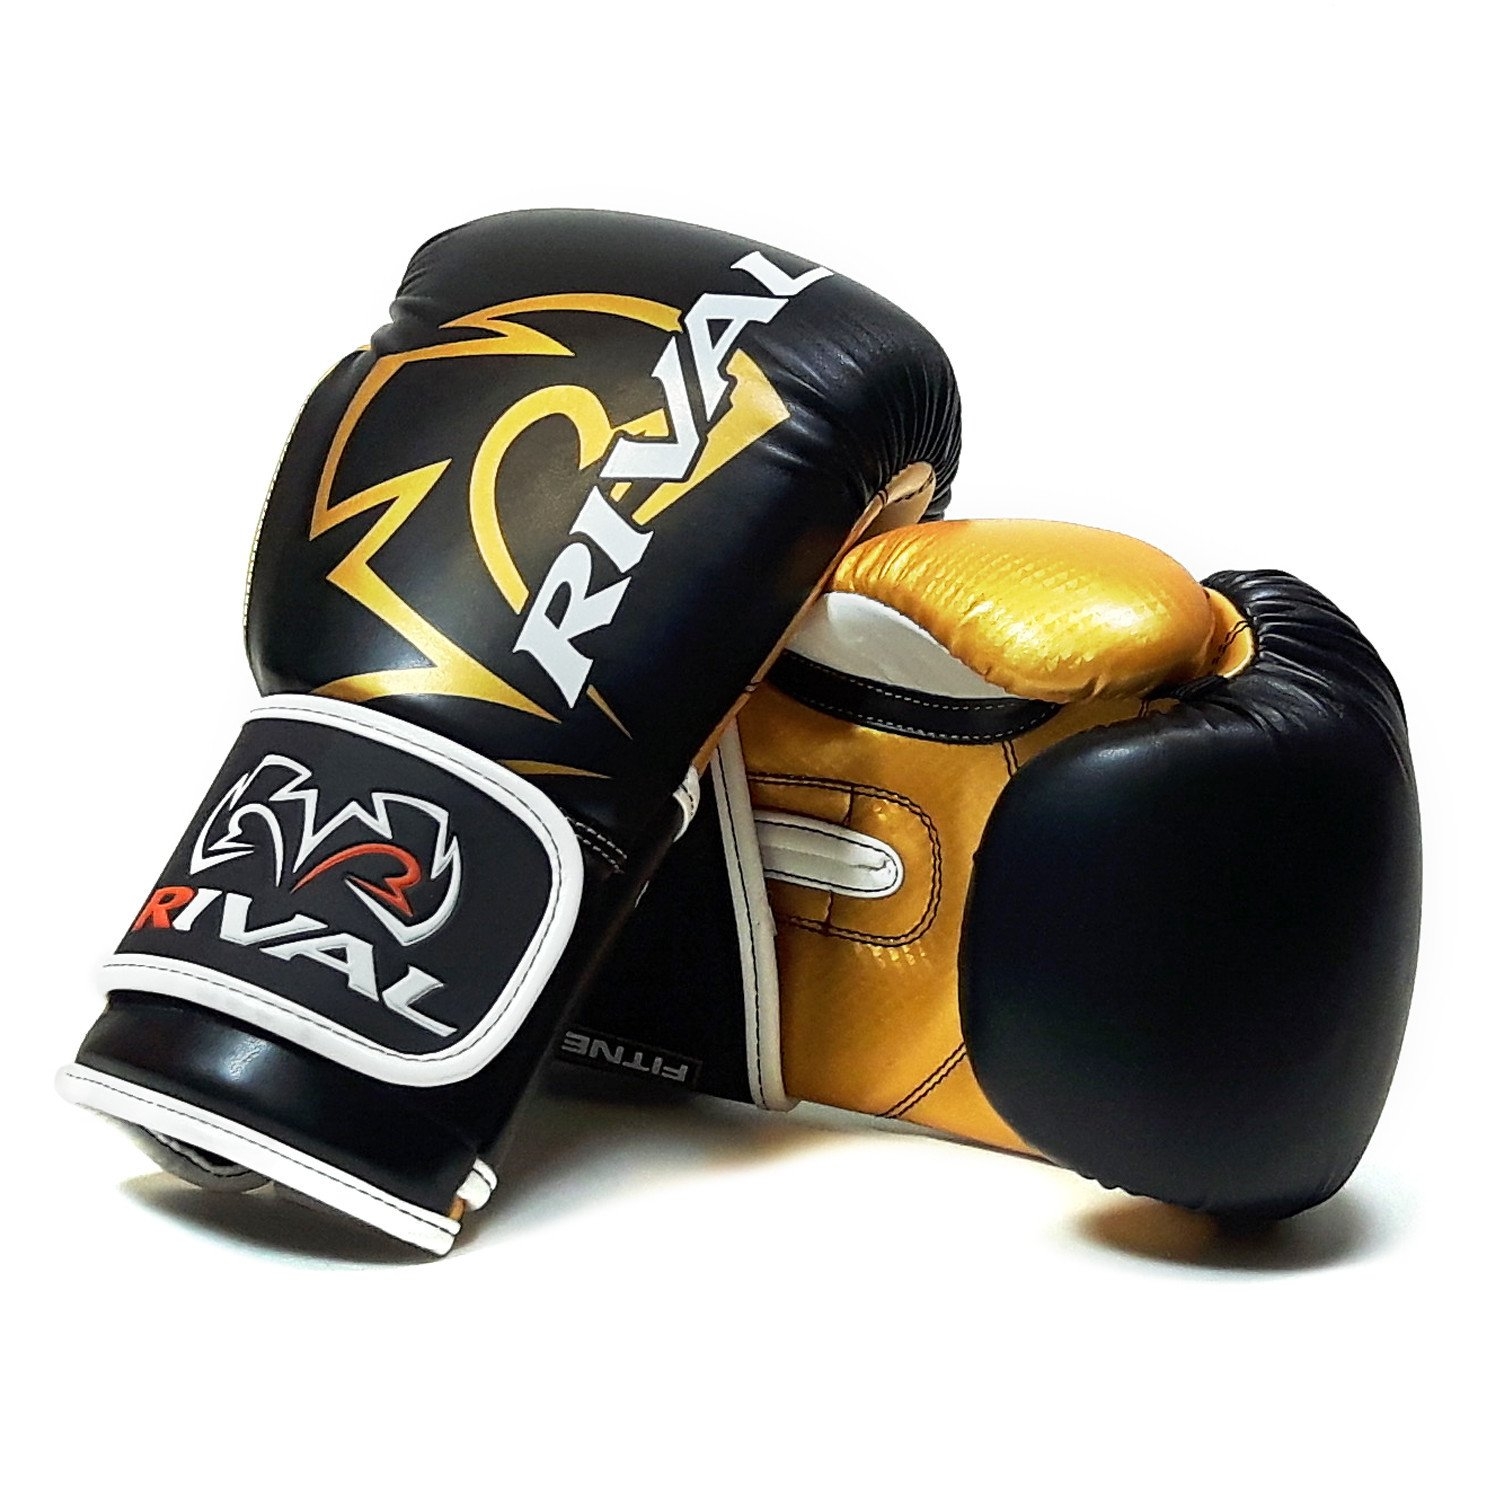 Rival Rb7 Fitness Bag Training Boxing Gloves Black Gold  – Size: 12 – Adult – Unisex